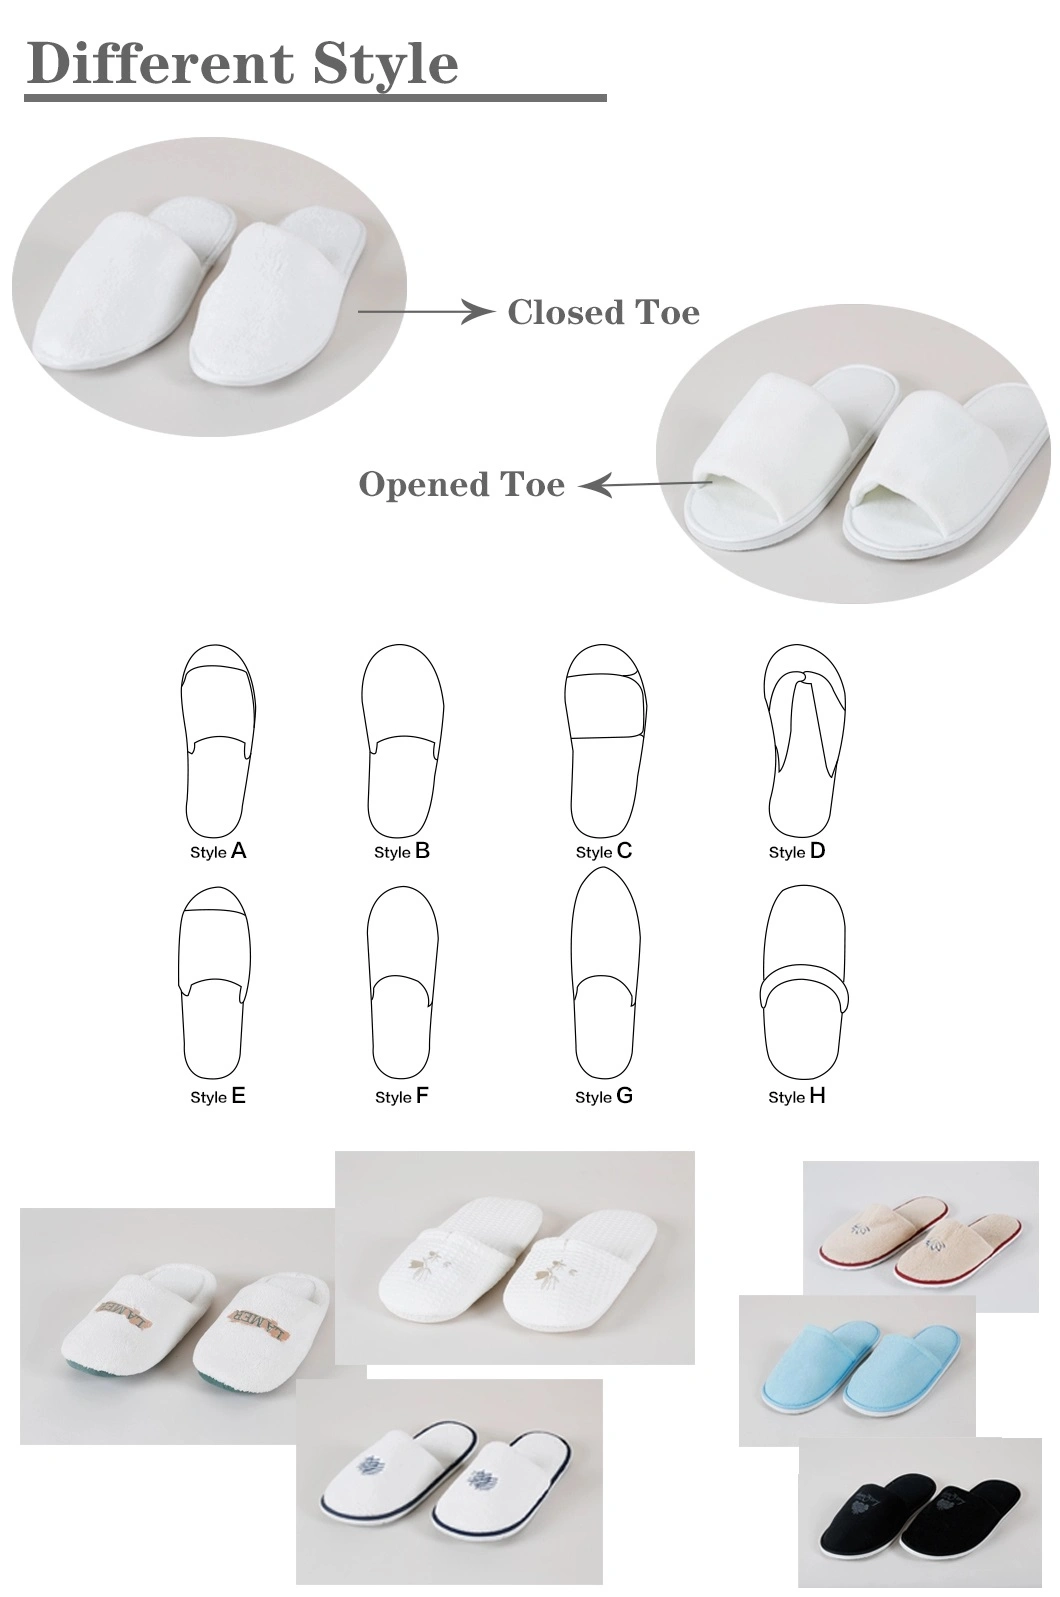 Home Plush Female Shoes Wholesale Anime Casual Indoor Warm Cute Pig Slippers for Women